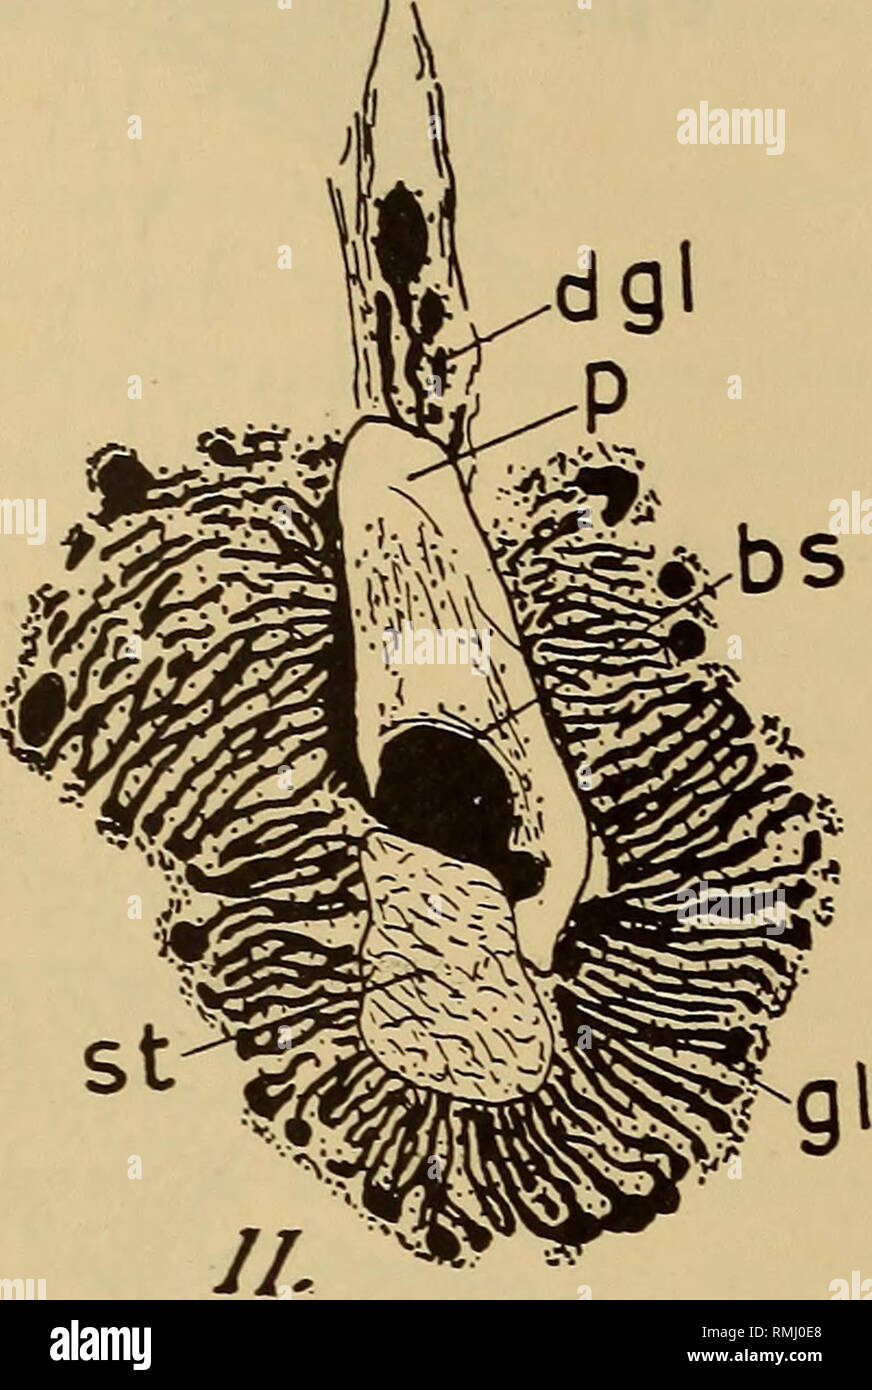 . Annals of the South African Museum = Annale van die Suid-Afrikaanse Museum. Natural history. jo. v Fig. 10. — Balanoglossus capensis. Cross-section of the anterior part of the proboscis organs, x 66. (/^glomeru- lus ; p = pericardium ; st = stomochord; vpa — ventral proboscis artery.. Fig. 11.—Balanoglossus stephensoni. Cross-section of the anterior part of the proboscis organs. x 66. 6s = central blood space ; dgl = dorsal glomerulus ; gl = glomerulus ; ^&gt;= pericardium ; st — stomochord. Collar.—In both species the epidermis of the collar shows the usual five zones, the second and fourth Stock Photo